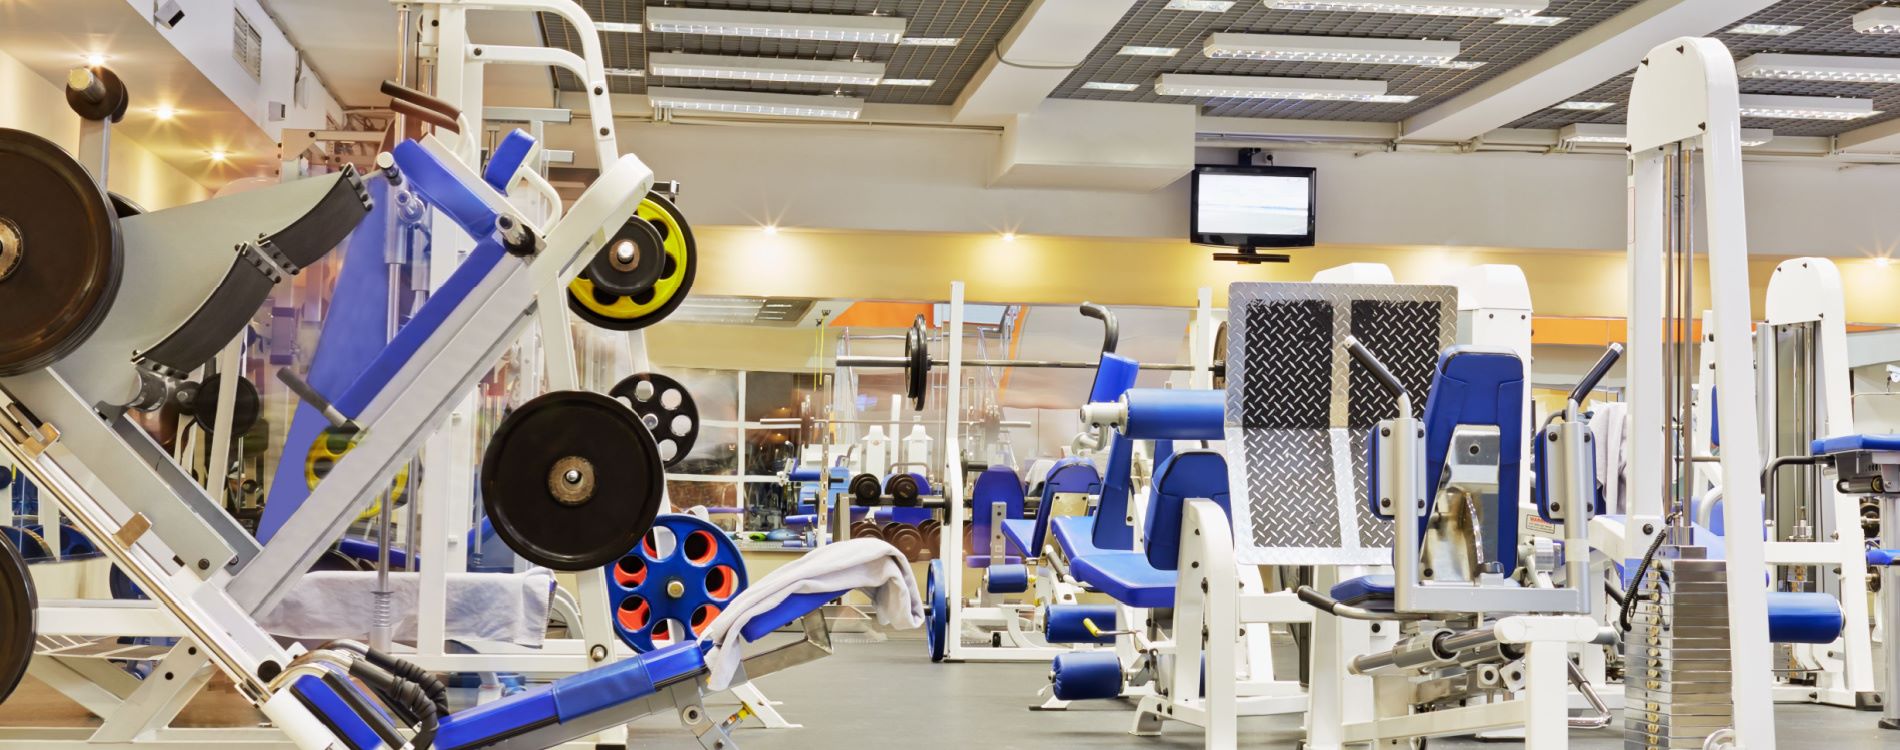 Implementing Smart Building Automation in Fitness Franchises with MEP Services